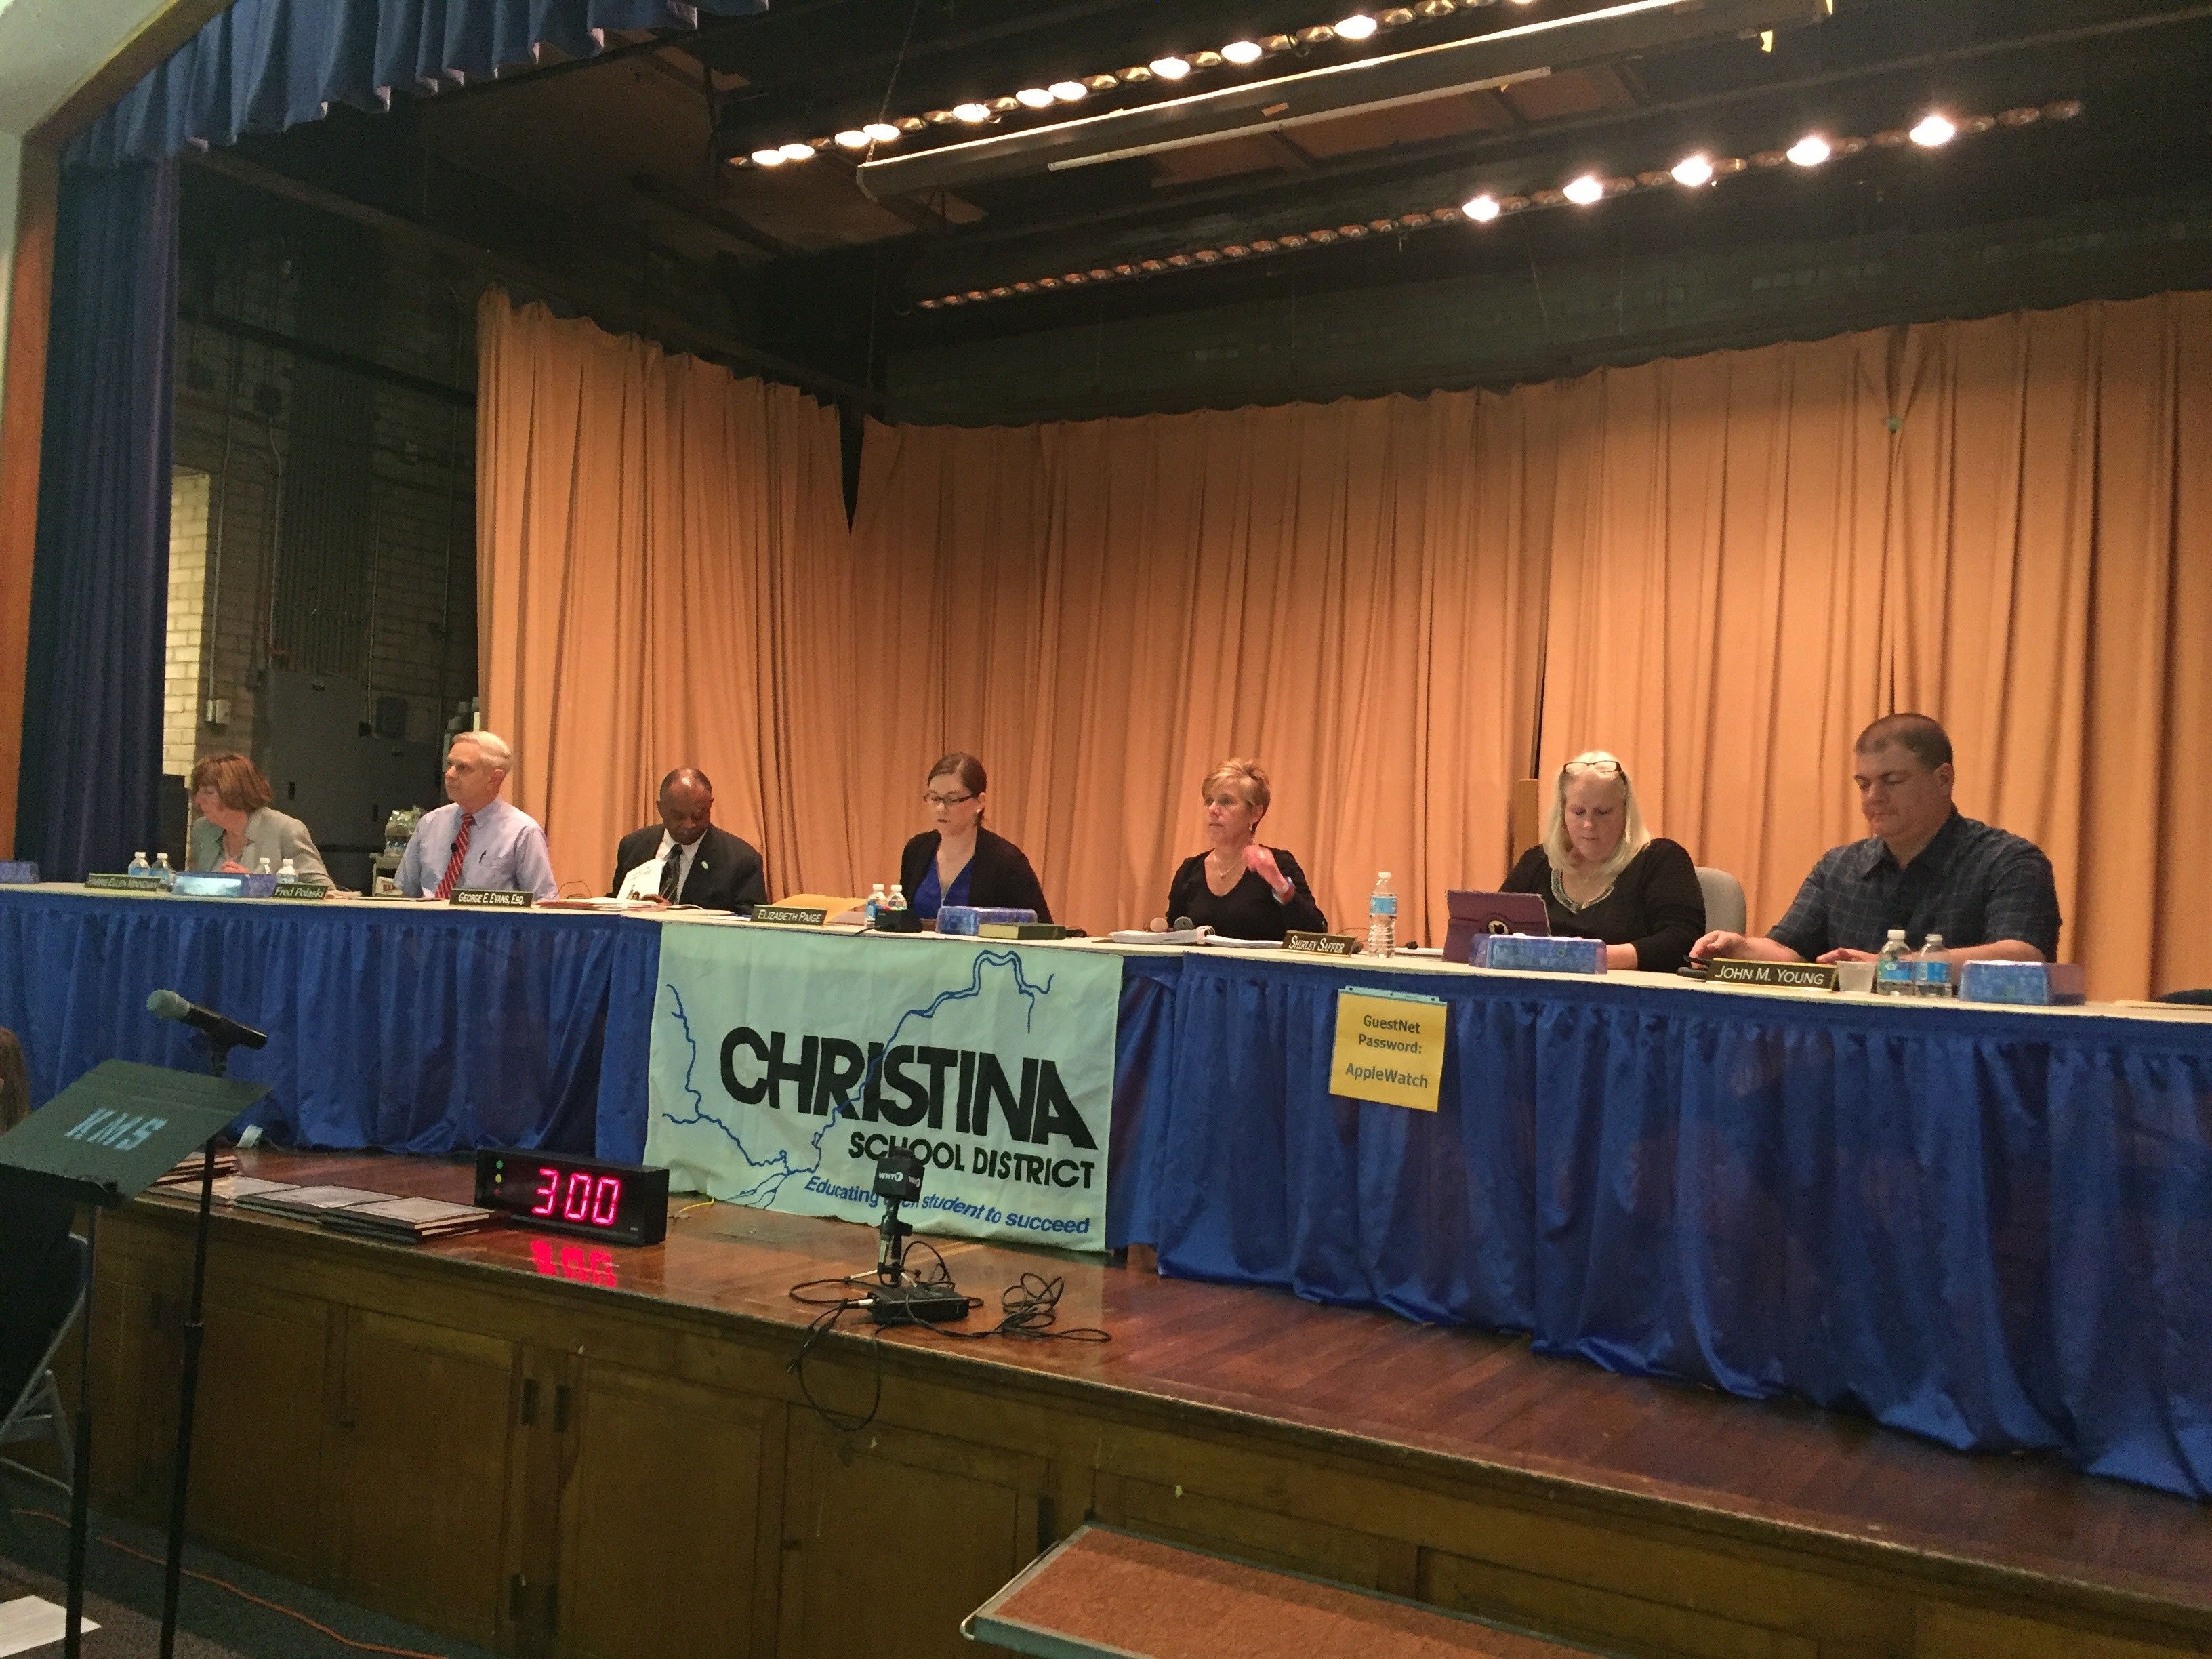  Christina School Disrict's board voted Tuesday to create Delaware's first 